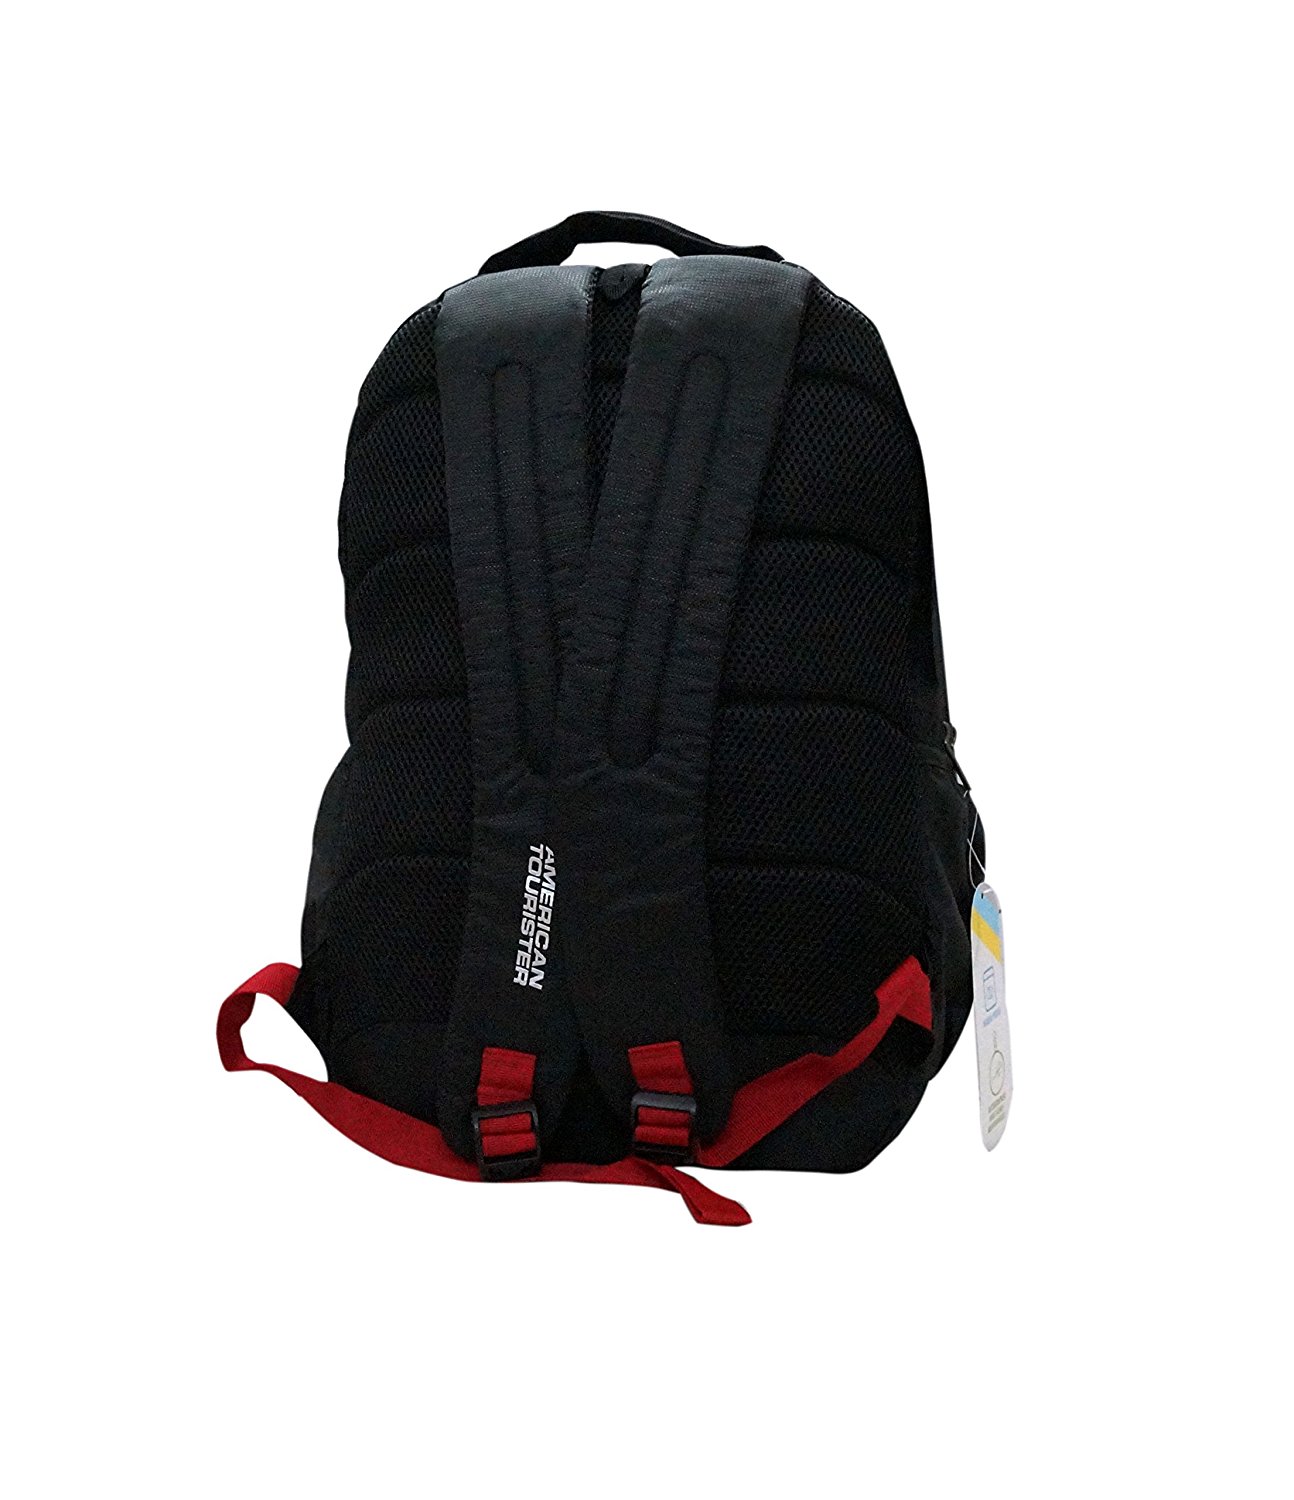 Buy Online American Tourister TANGO PLUS 02 Backpack (Black) at cheap Price in India | 24eshop